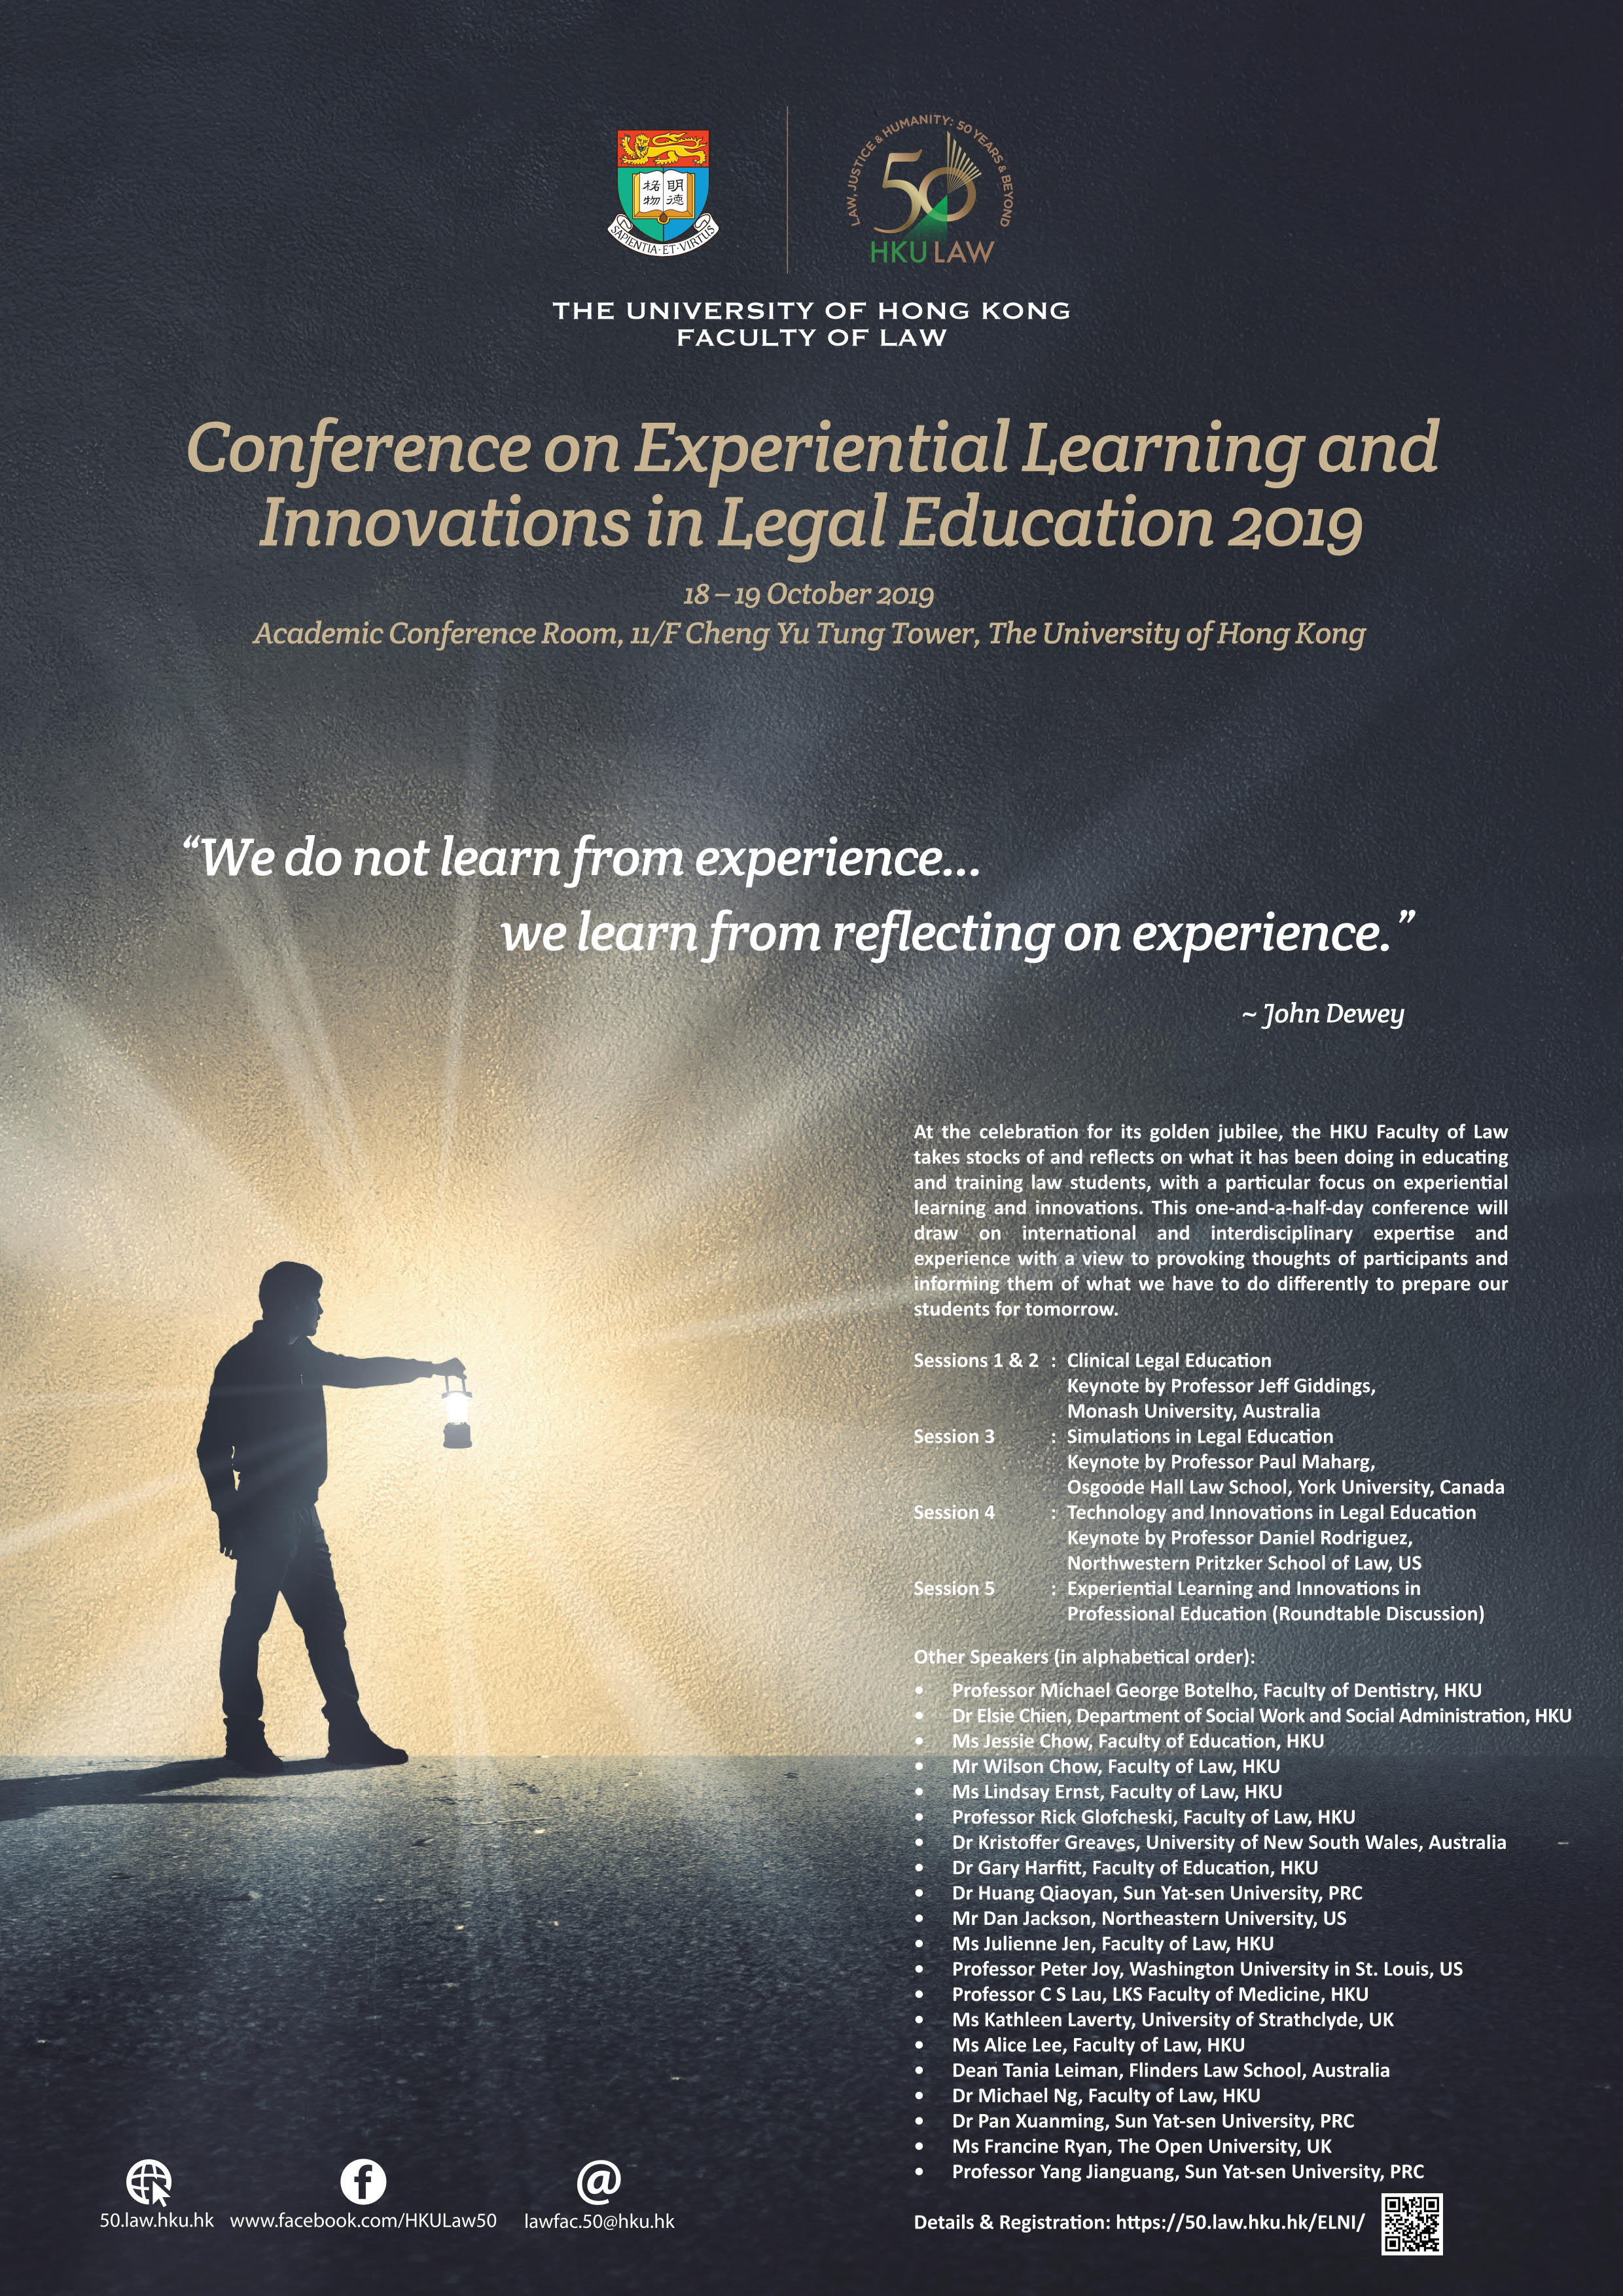 Conference on Experiential Learning and Innovations in Legal Education 2019